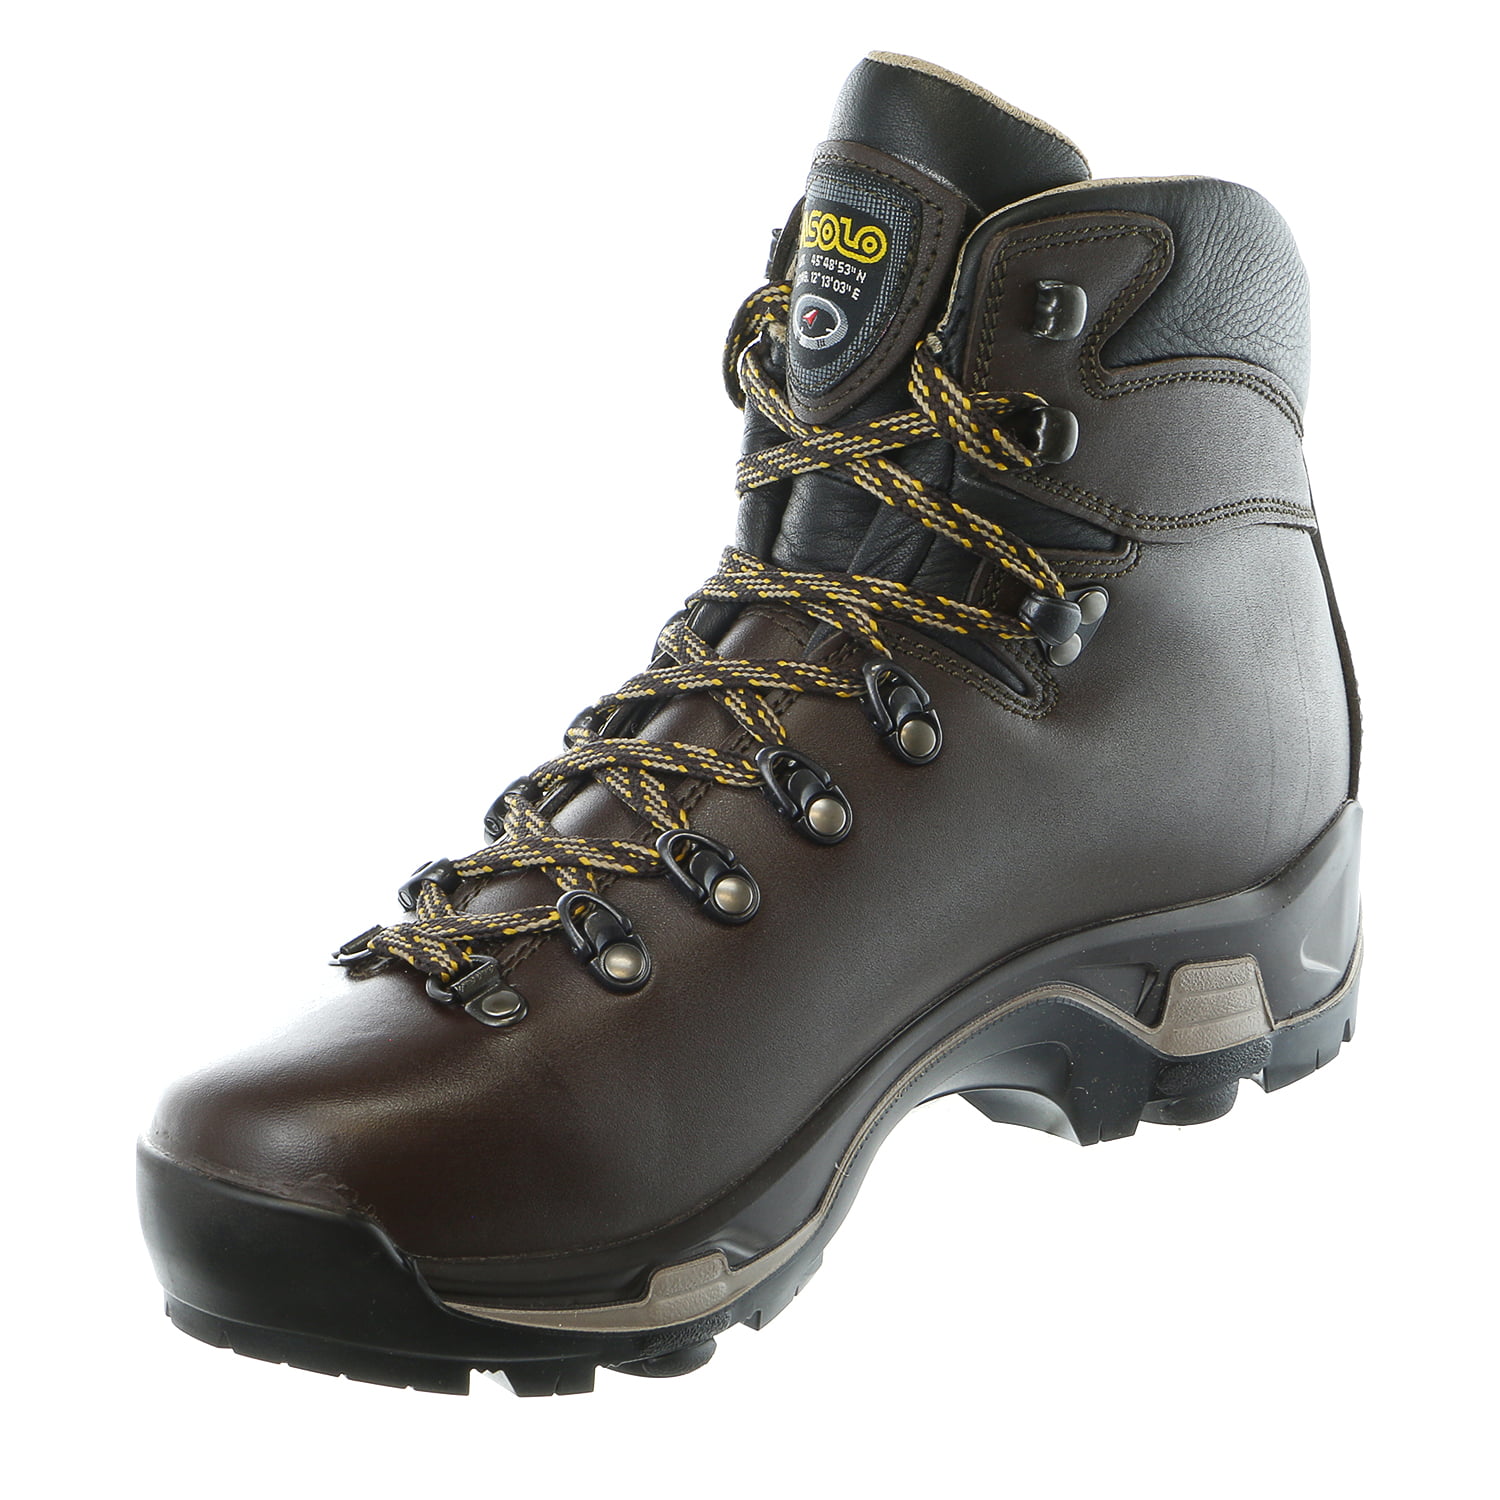 Asolo Mens TPS 520 GV Evo Hiking Boots Brown Chestnut Size 12.5 Year ...